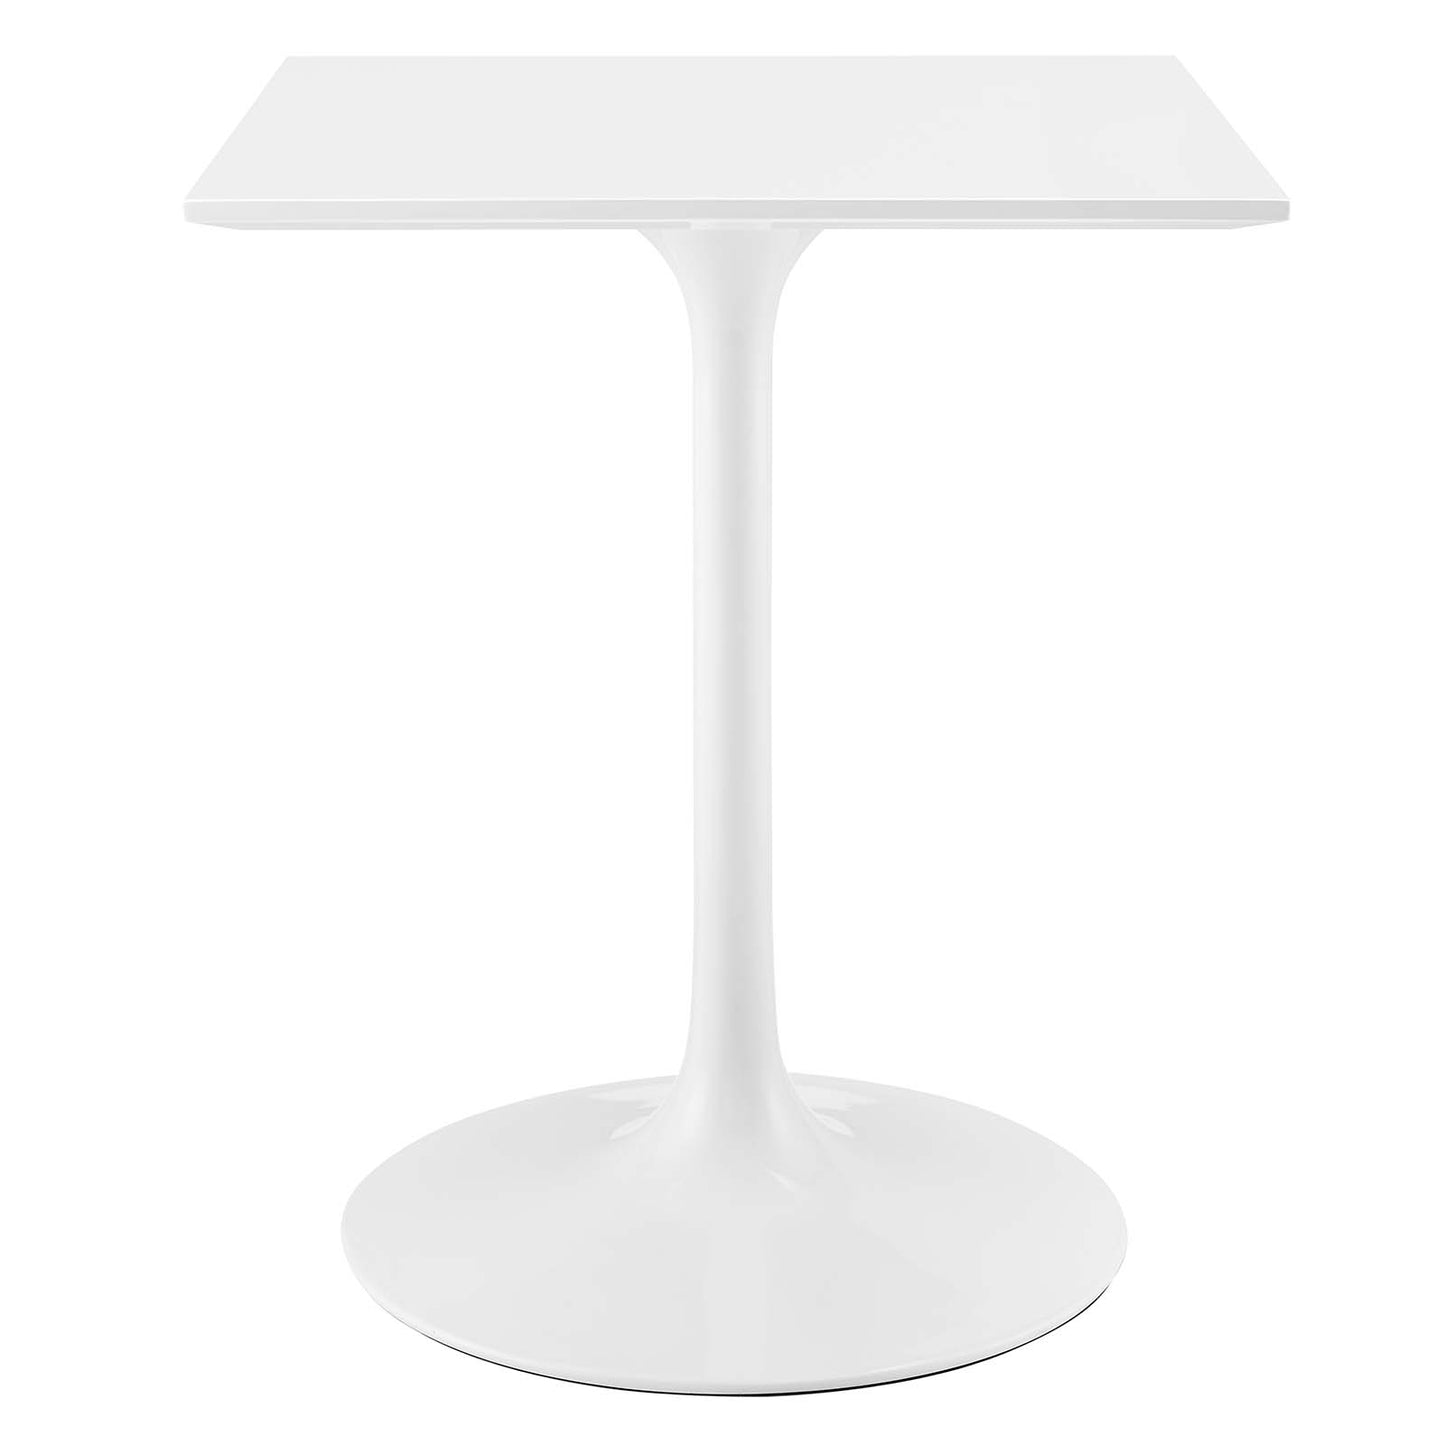 Modway Lippa 24" Square Wood Top Dining Table - White - EEI-1122